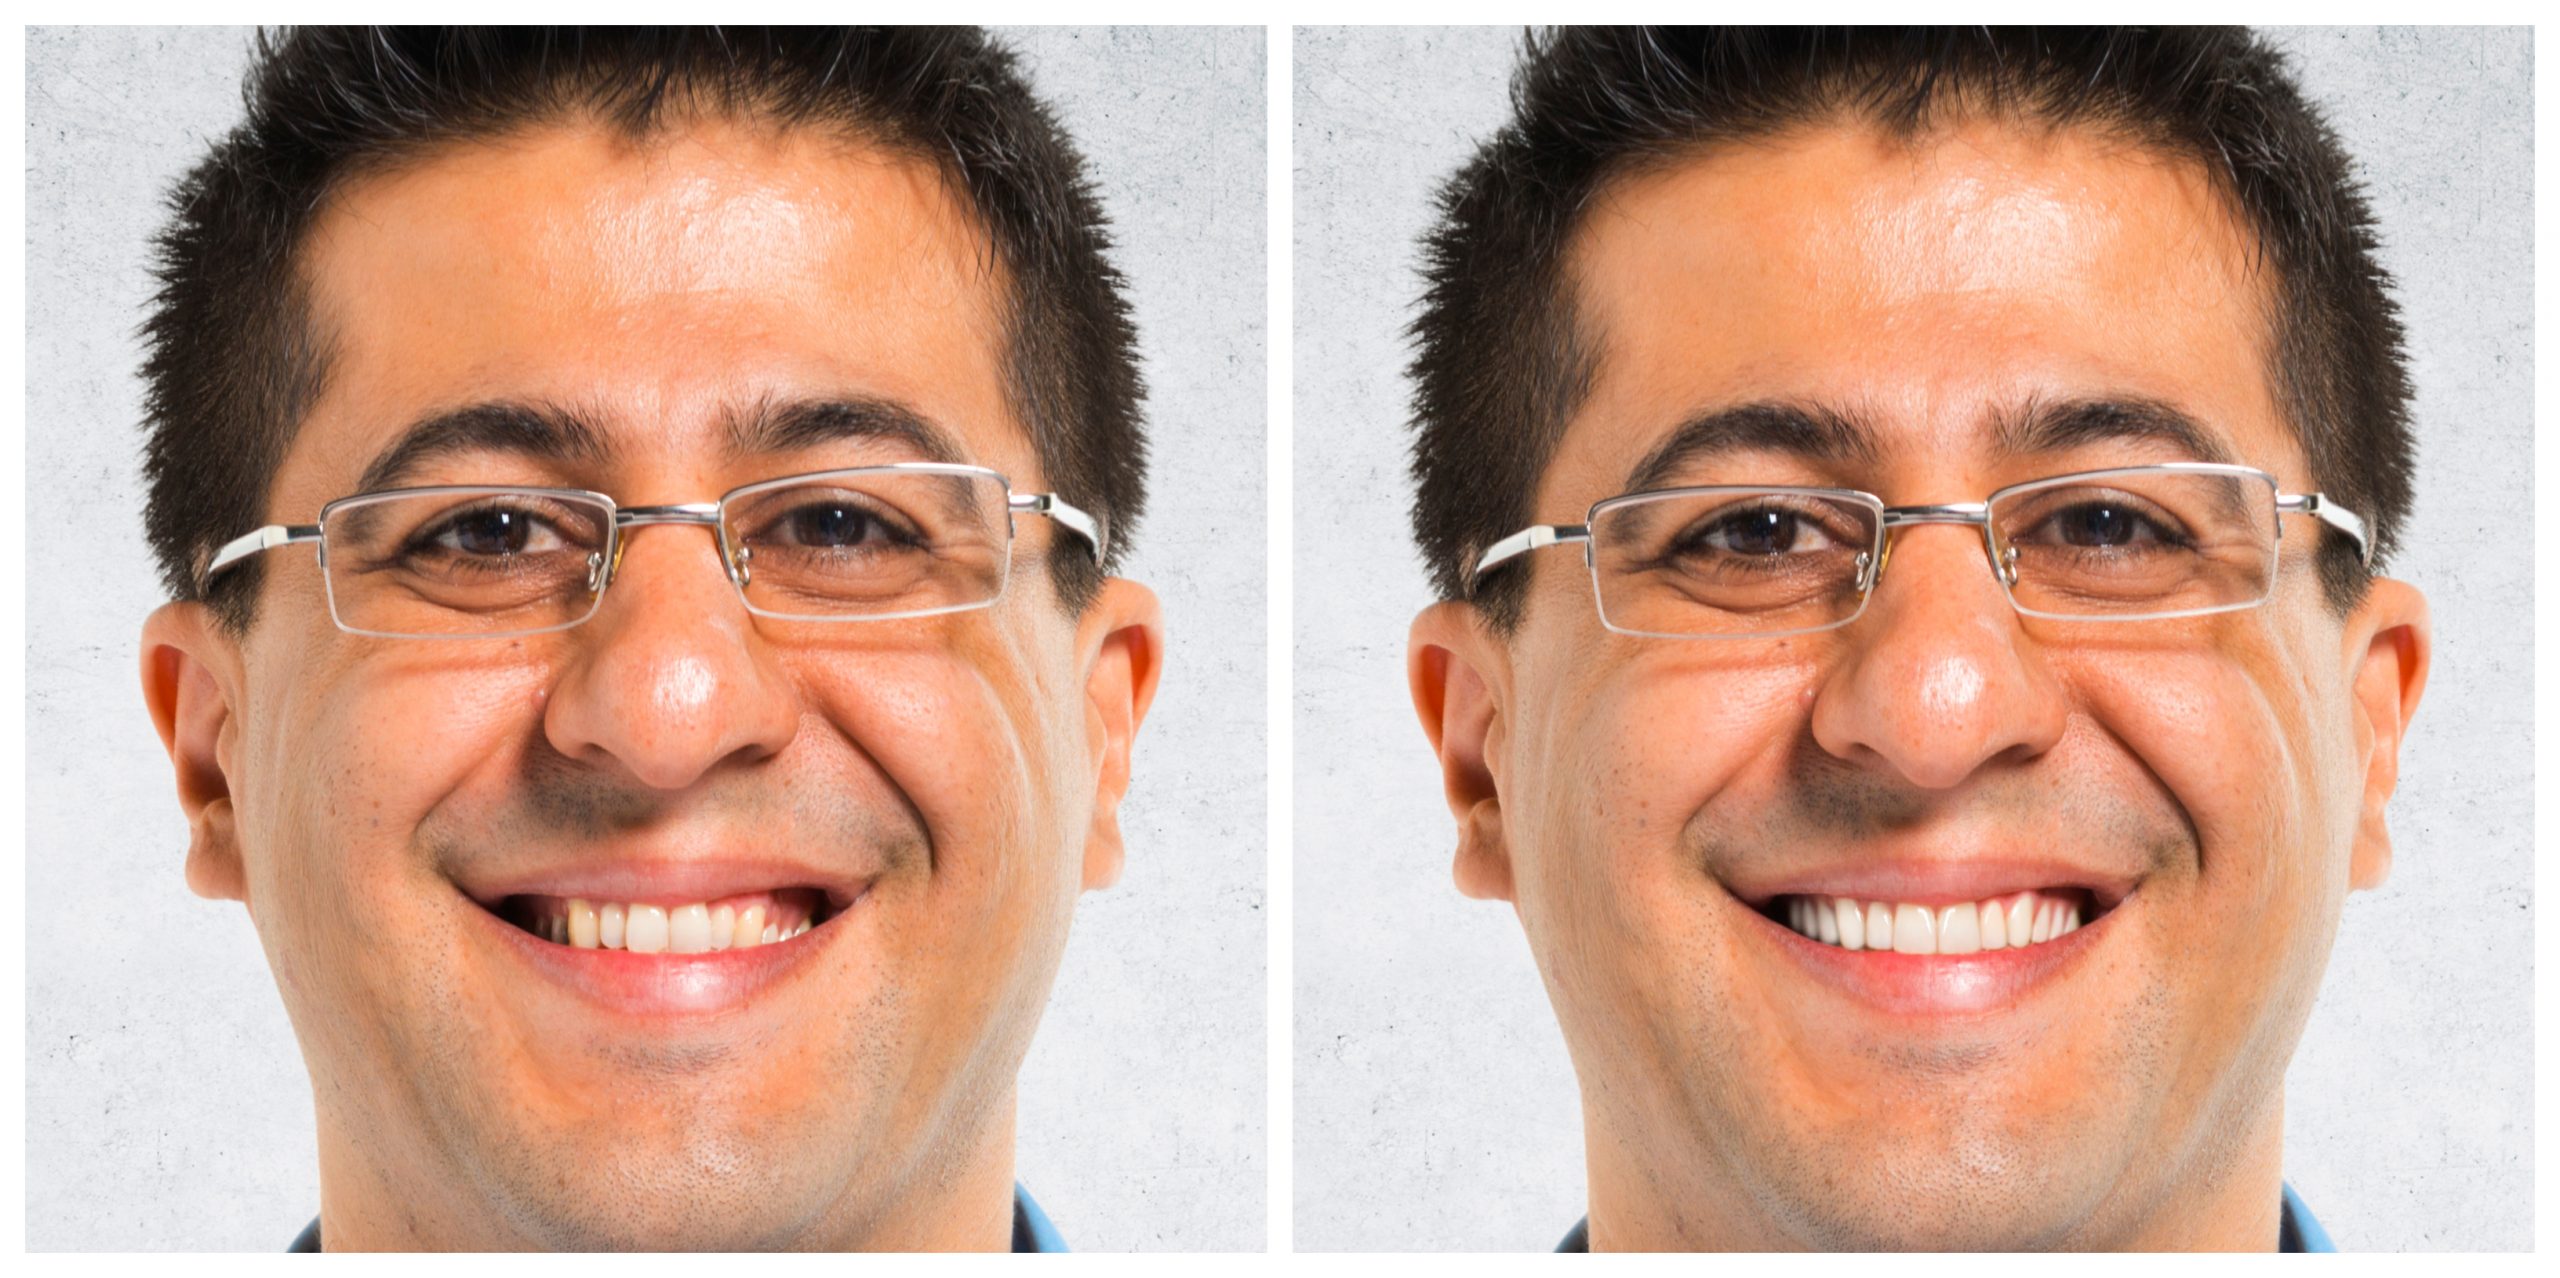 Smile Restoration - Before and After18